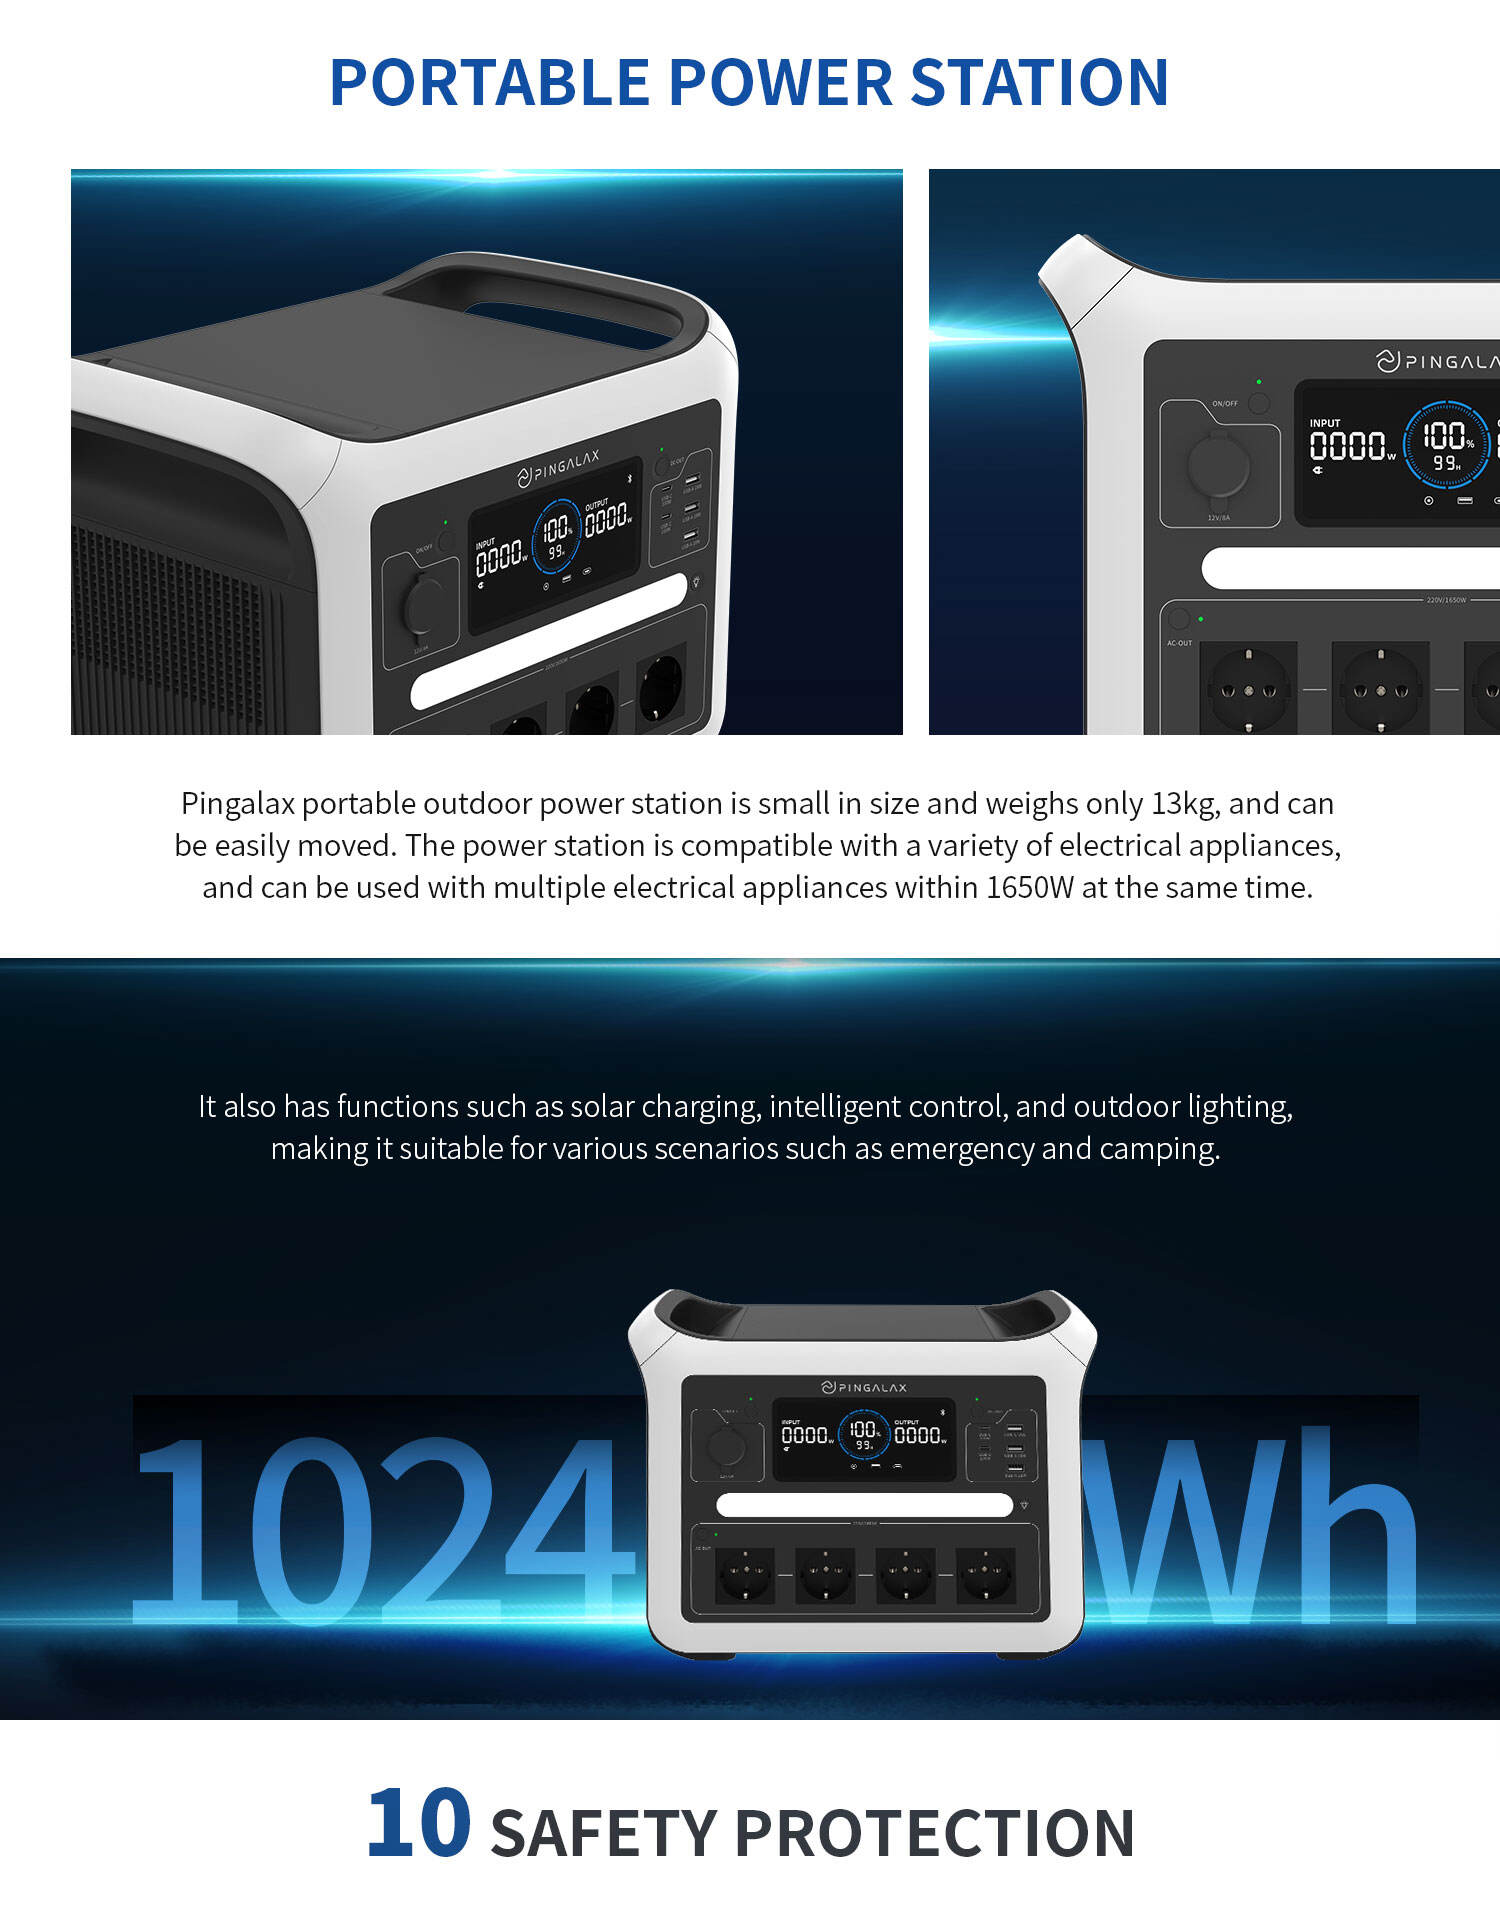 1024Wh Solar Generator with AC Outlet for Camping Emergency Use Solar Charger for RV Off Grid System Portable Power Station details